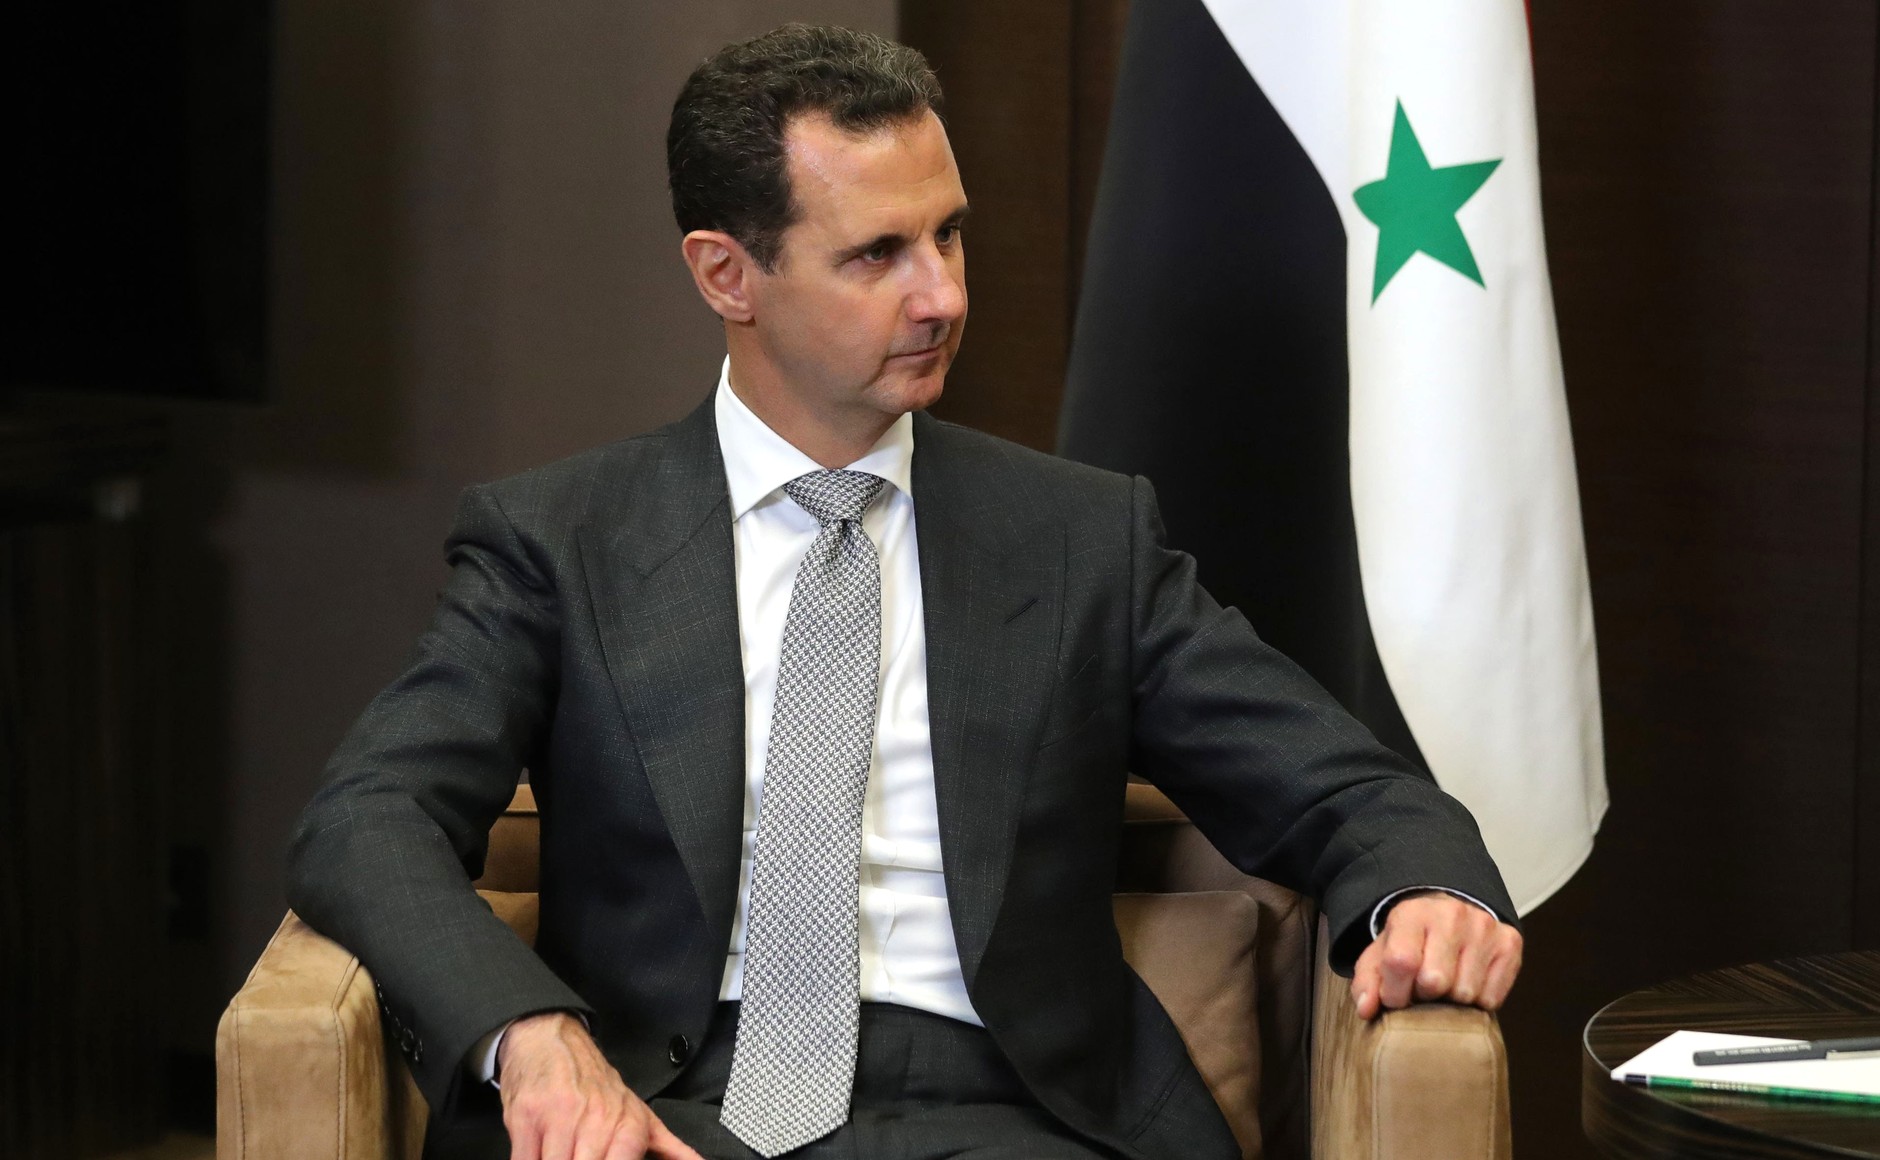 Syrian president's wife says she has fully recovered from breast cancer